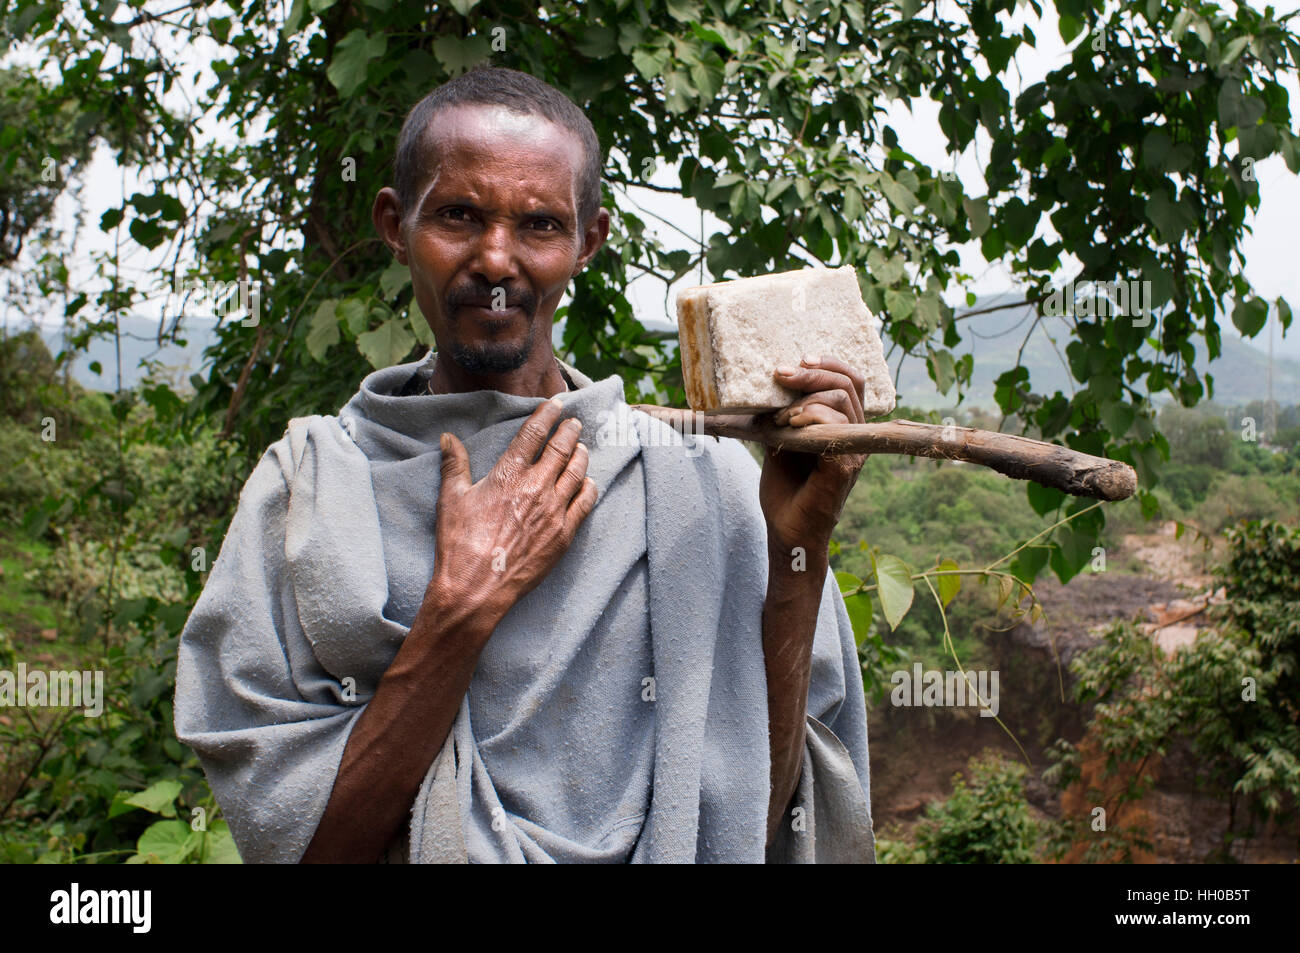 Local man in Tis Isat or Blue Nile waterfalls, Bahar Dar, Ethiopia, Africa. Portrait of an Ethiopian from the area at the foot of the Blue Nile Falls Stock Photo